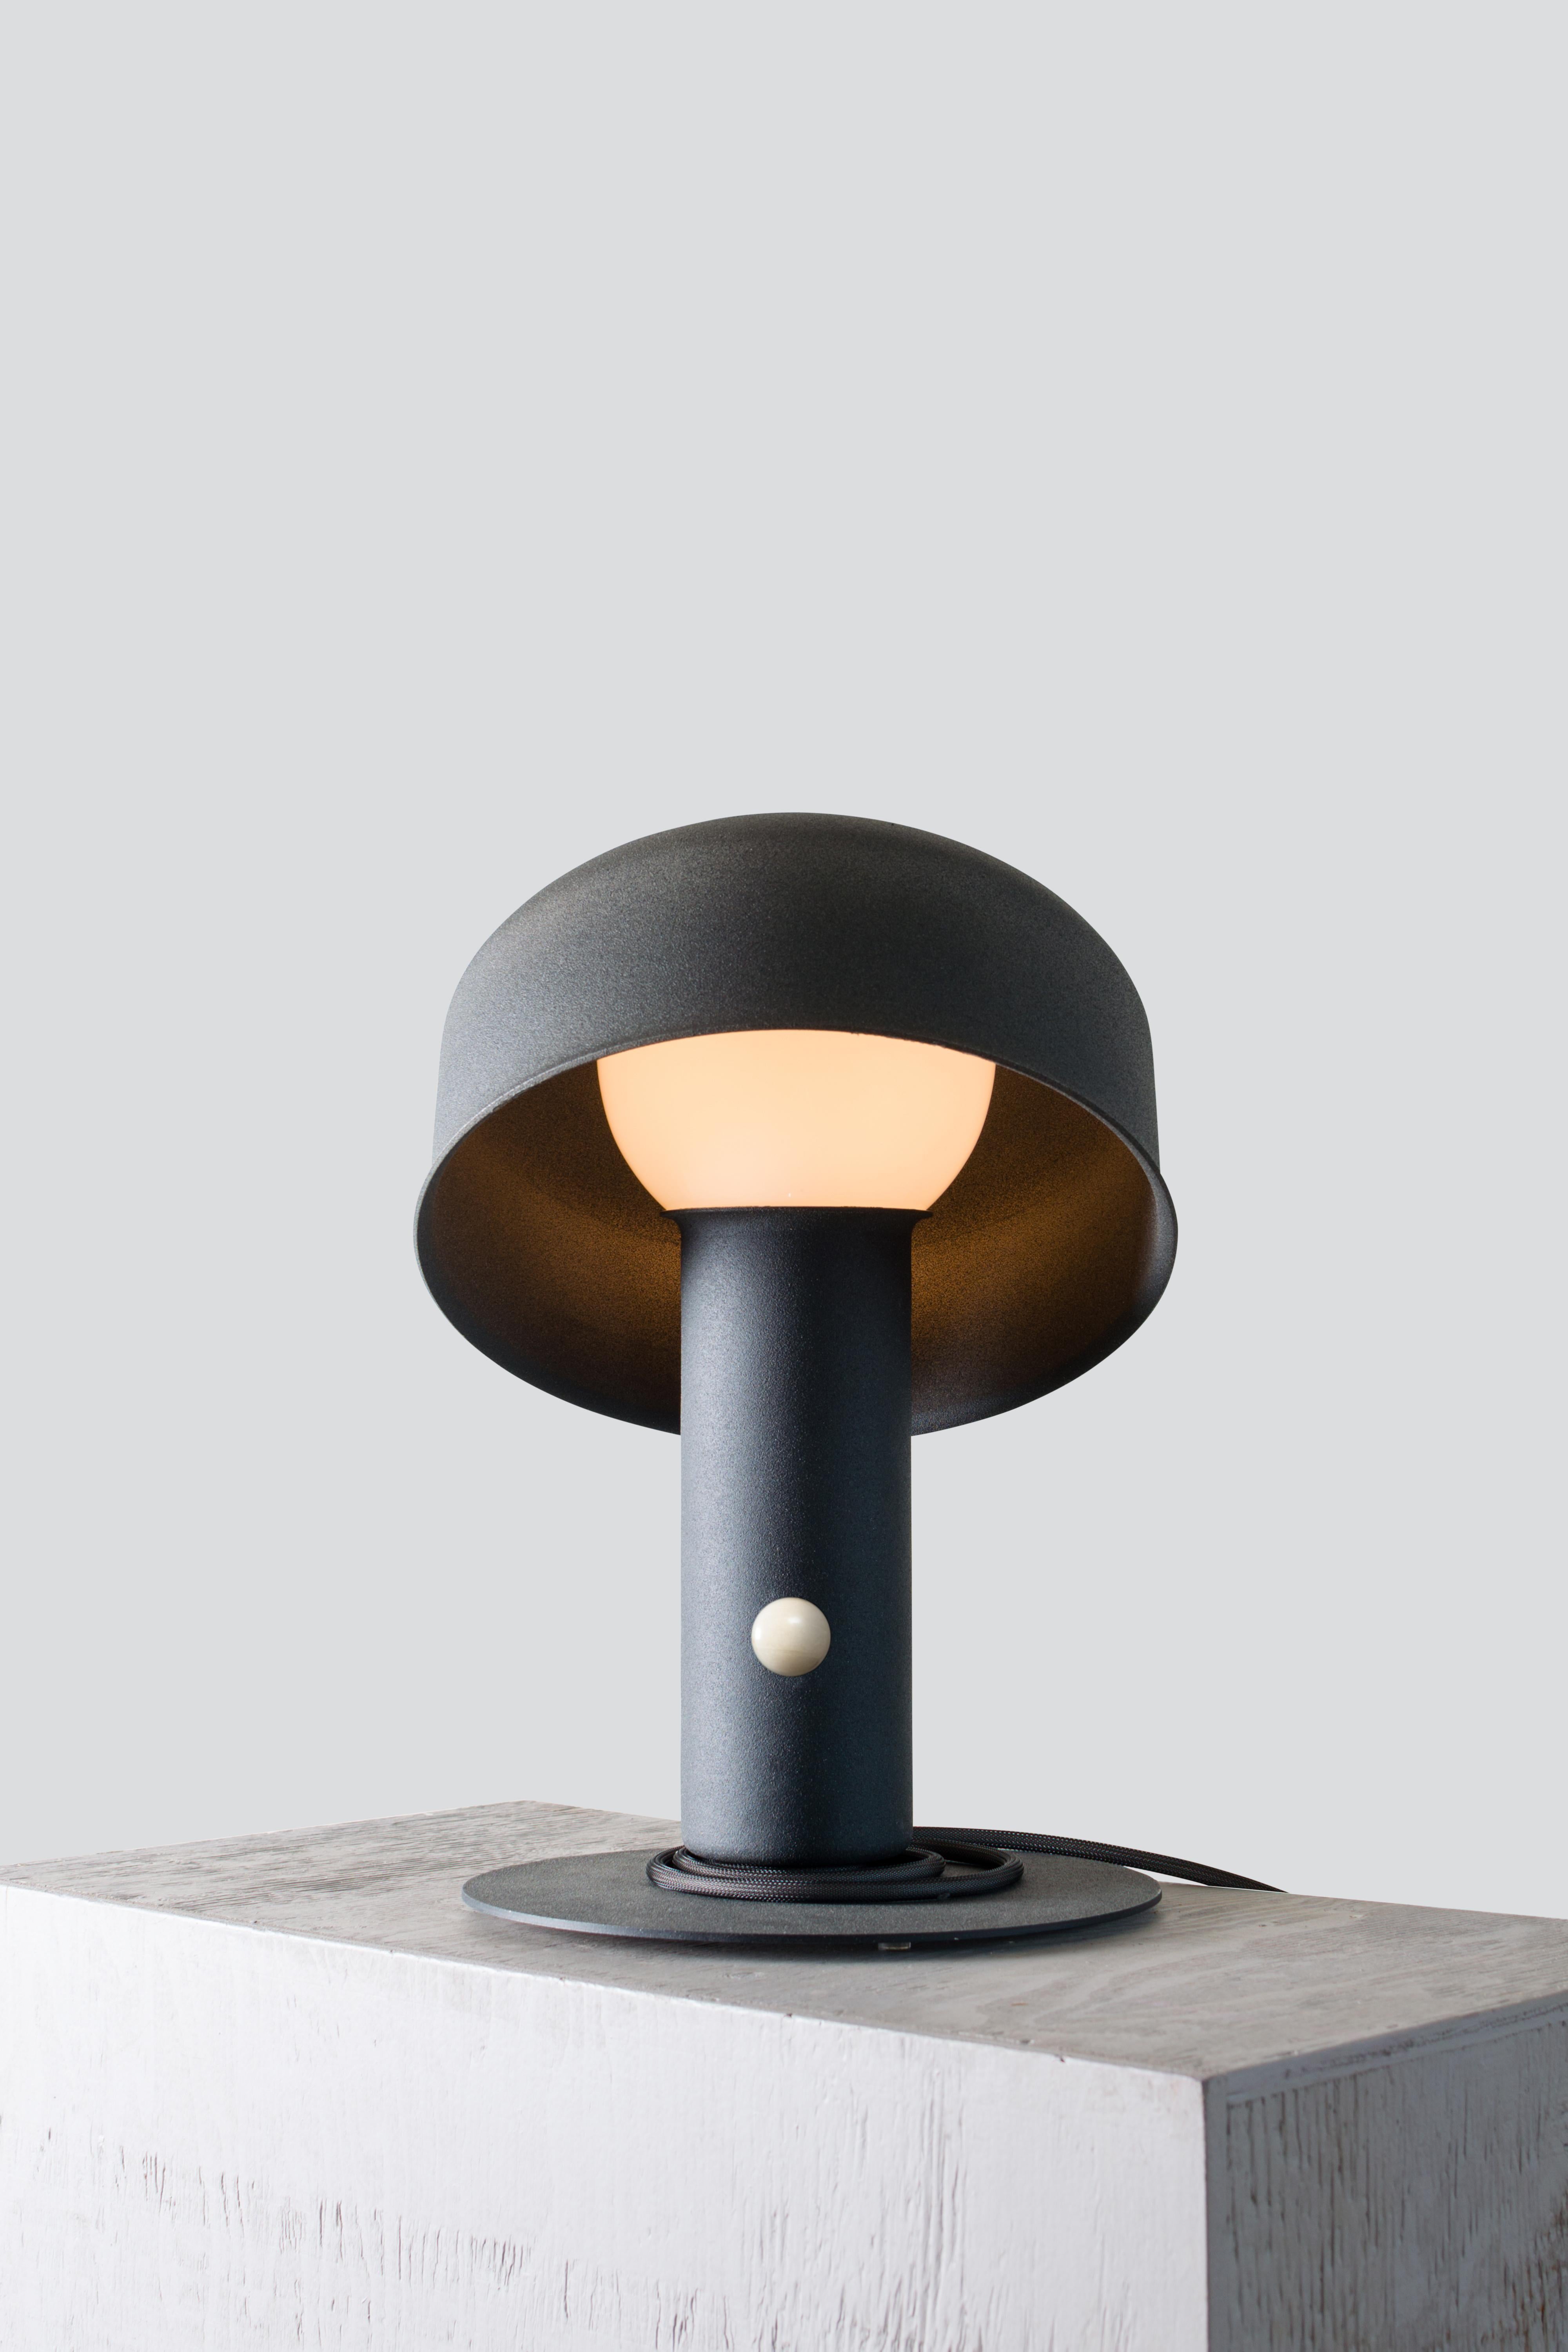 PIVOT - Table lamp
Design: Lukas Peet, editor: ANDLight

The Pivot table luminaire is playful and interactive as its balancing shade allows for easy adjustments.

Materials:
– Steel
– Aluminum 
– Glass

Dimensions:
380 x 280 x 280mm / 15”